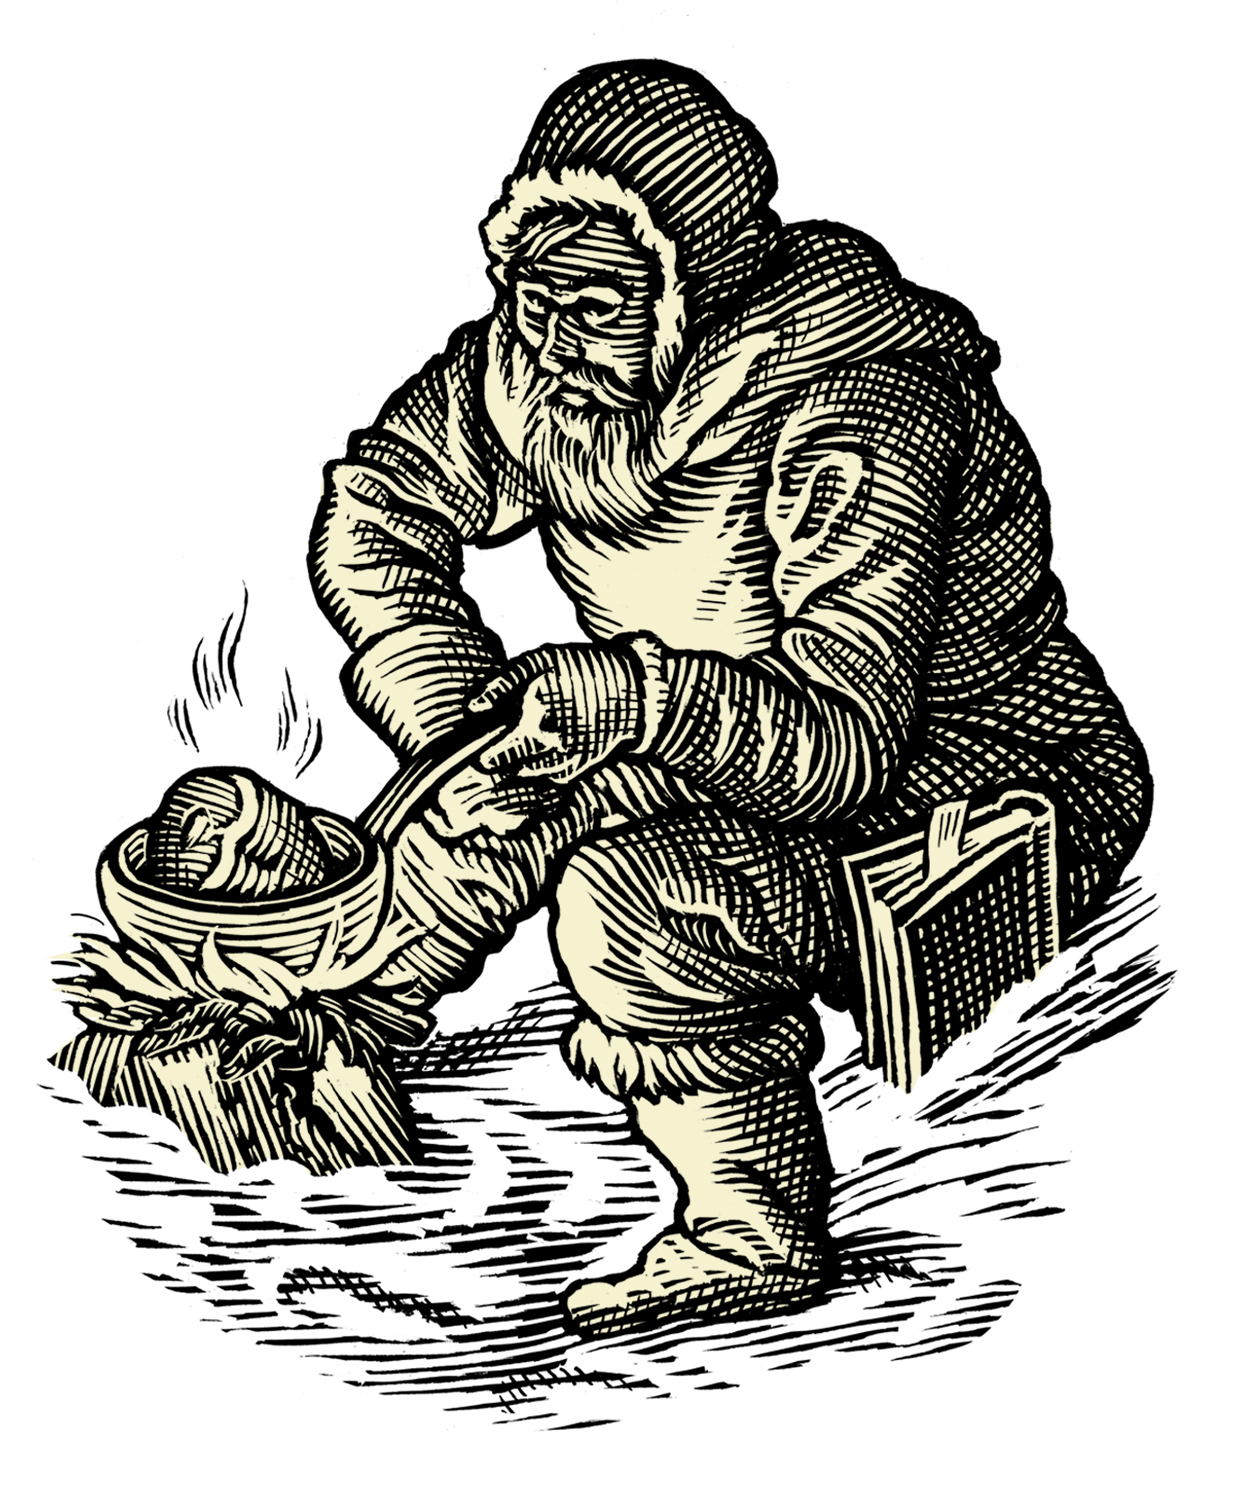 Black-and-white illustration of Sir John Richardson, dressed in Arctic furs and huddled before a camp fire, stirring a cook pot